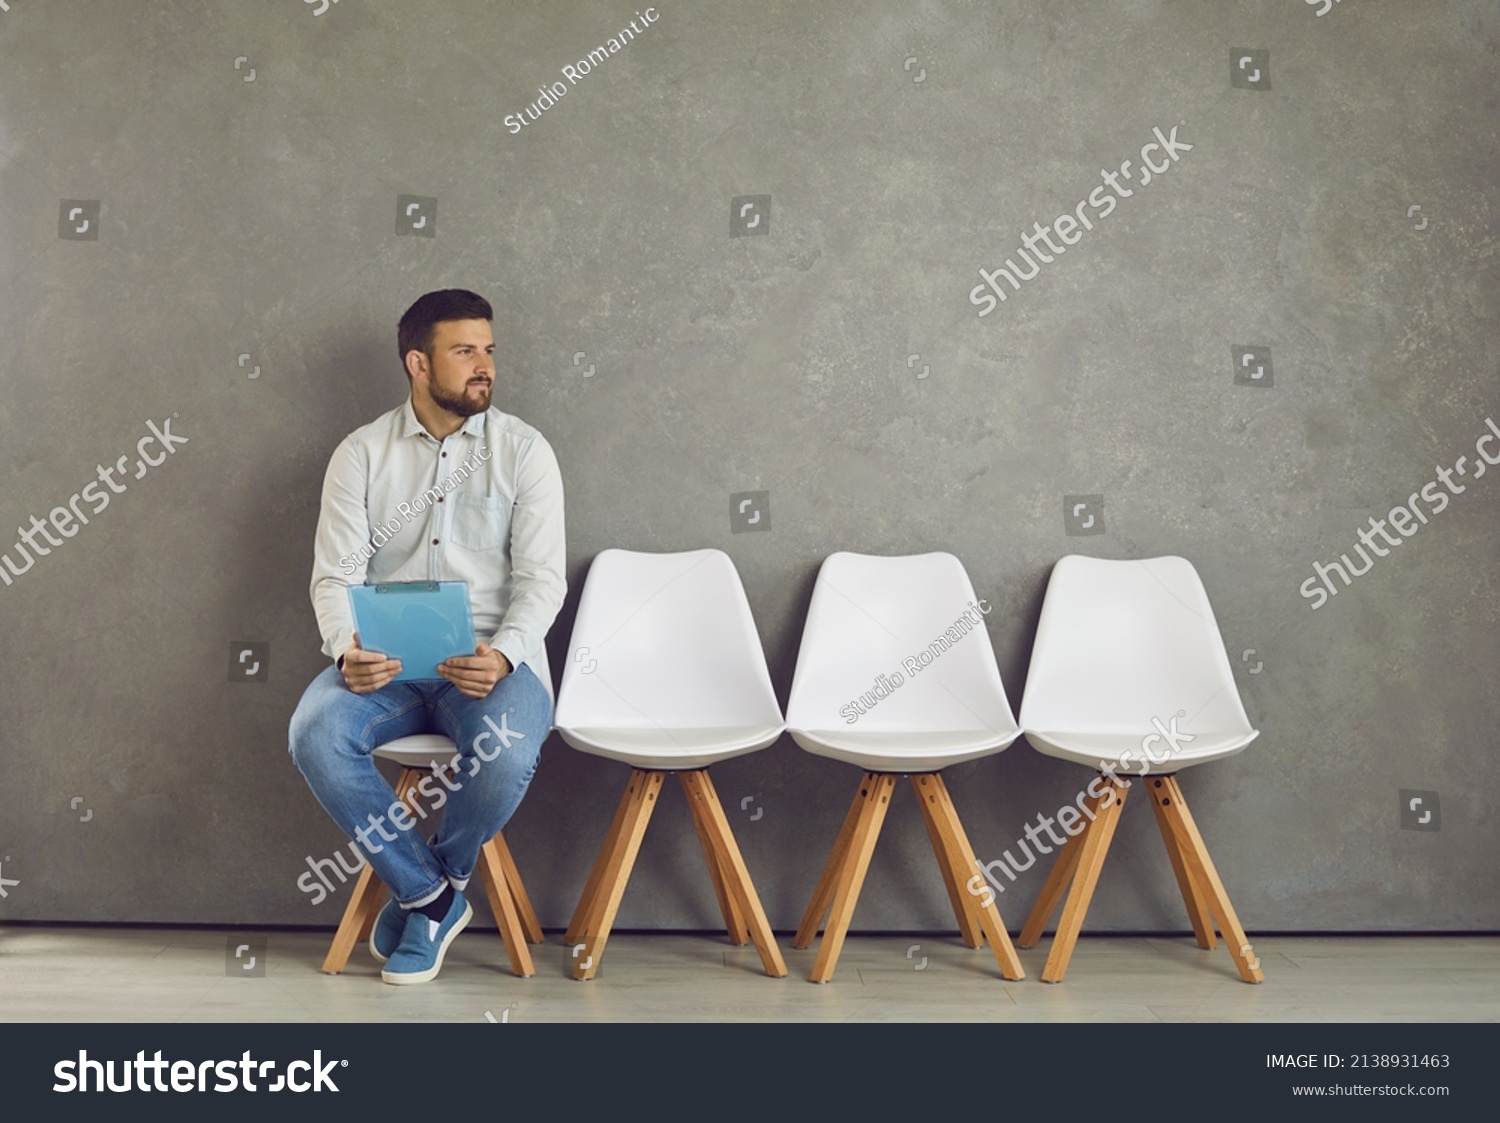 Worried young caucasian male job seeker vacancy candidate holding resume form waiting for interview meeting sitting on chair looking aside. Jobless applicant at recruitment staffing agency #2138931463